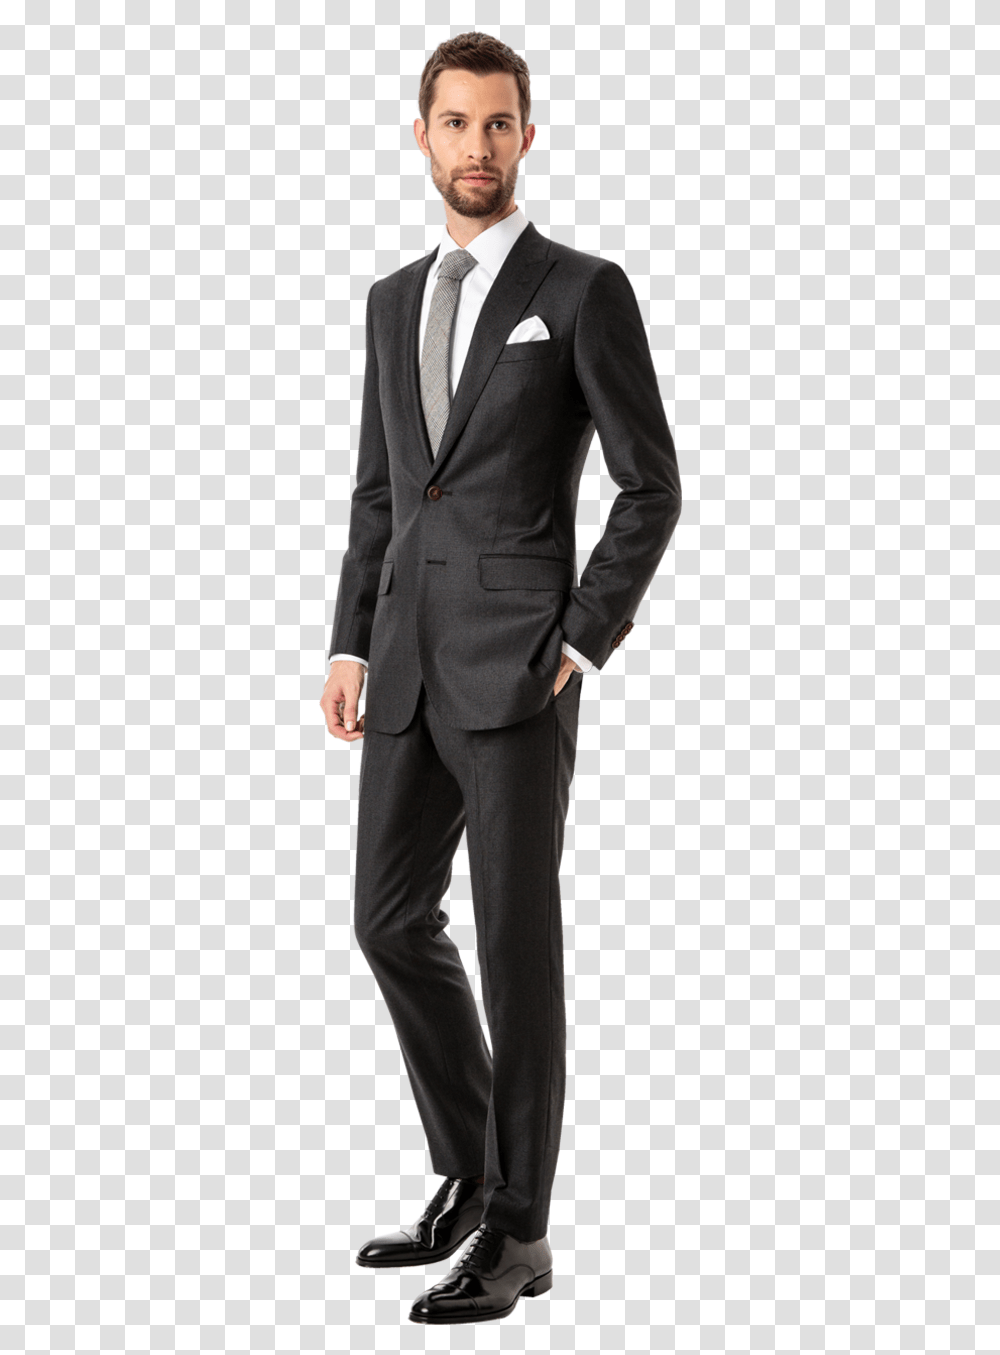 Collection Of Free Man Suit Man Suit, Overcoat, Apparel, Tuxedo Transparent Png